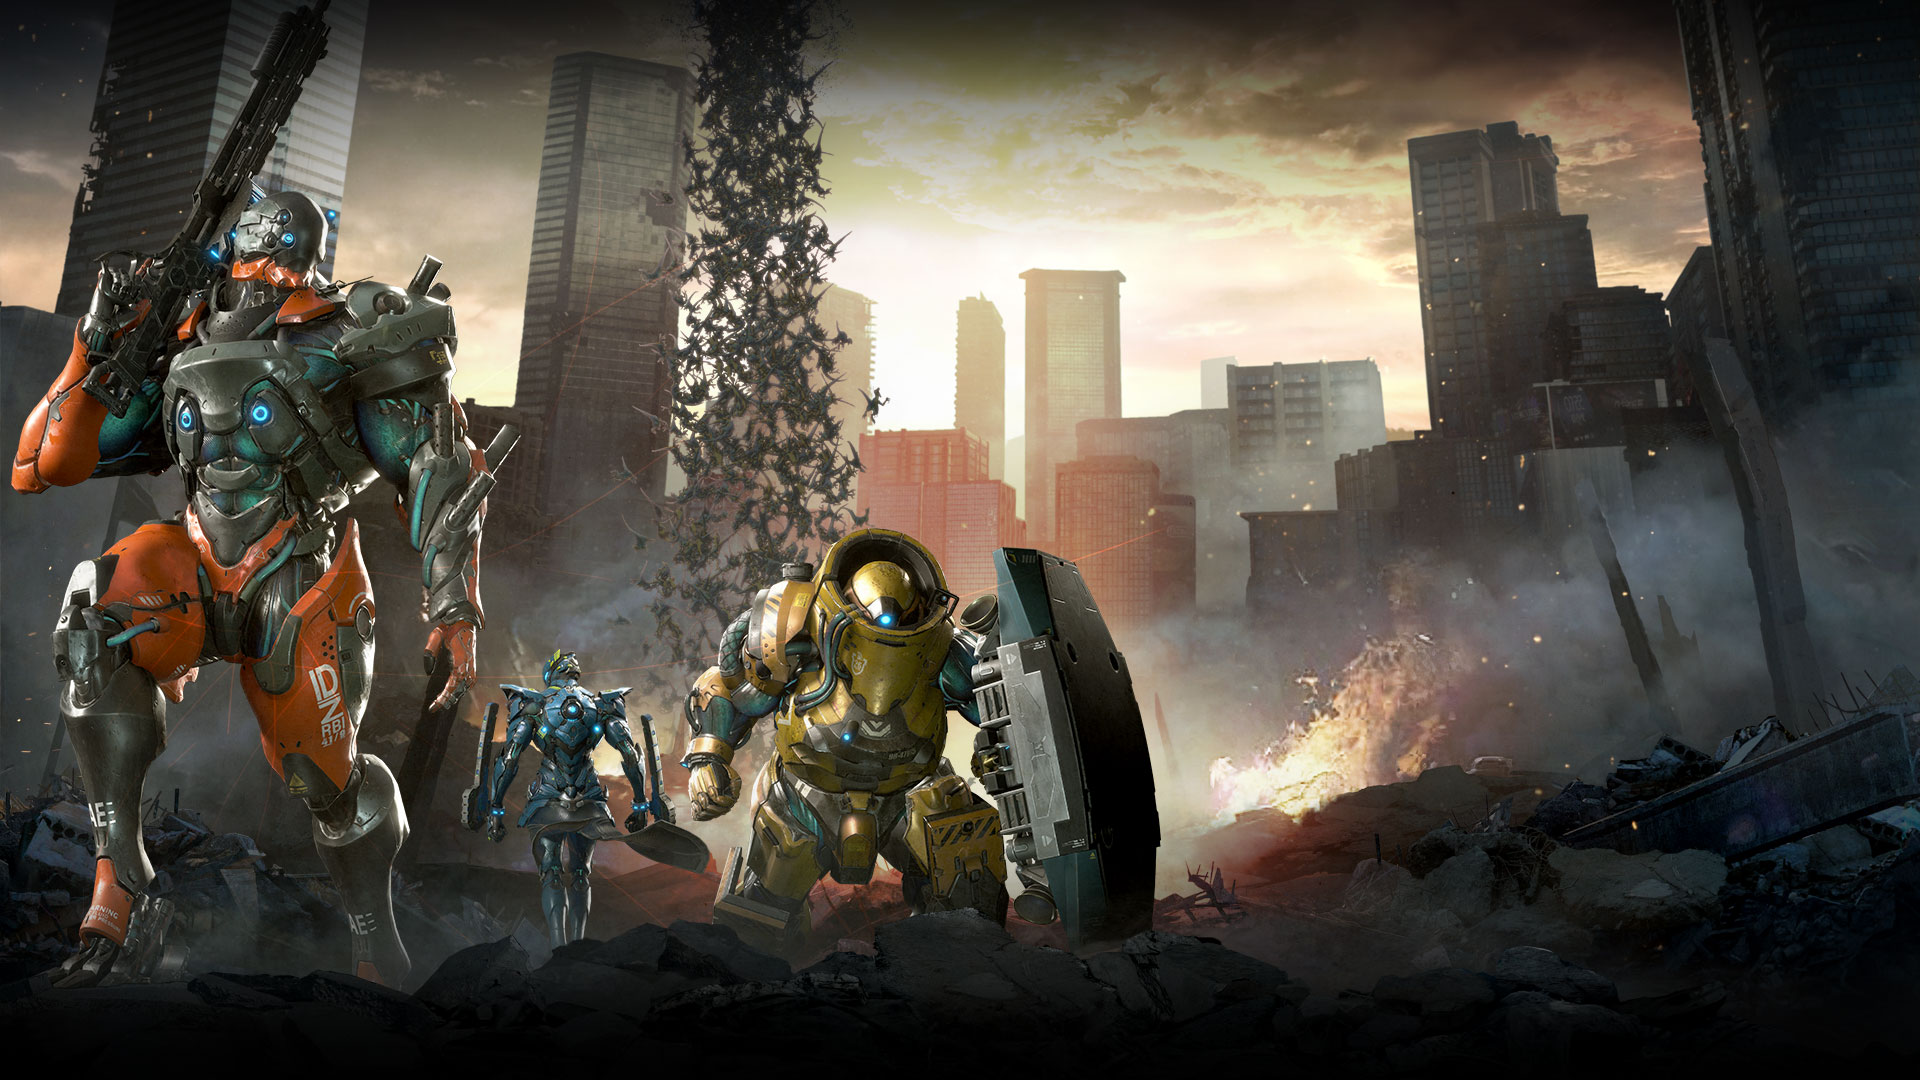 Three mechanized suits stand among urban rubble, dinosaurs cascade from the sky.